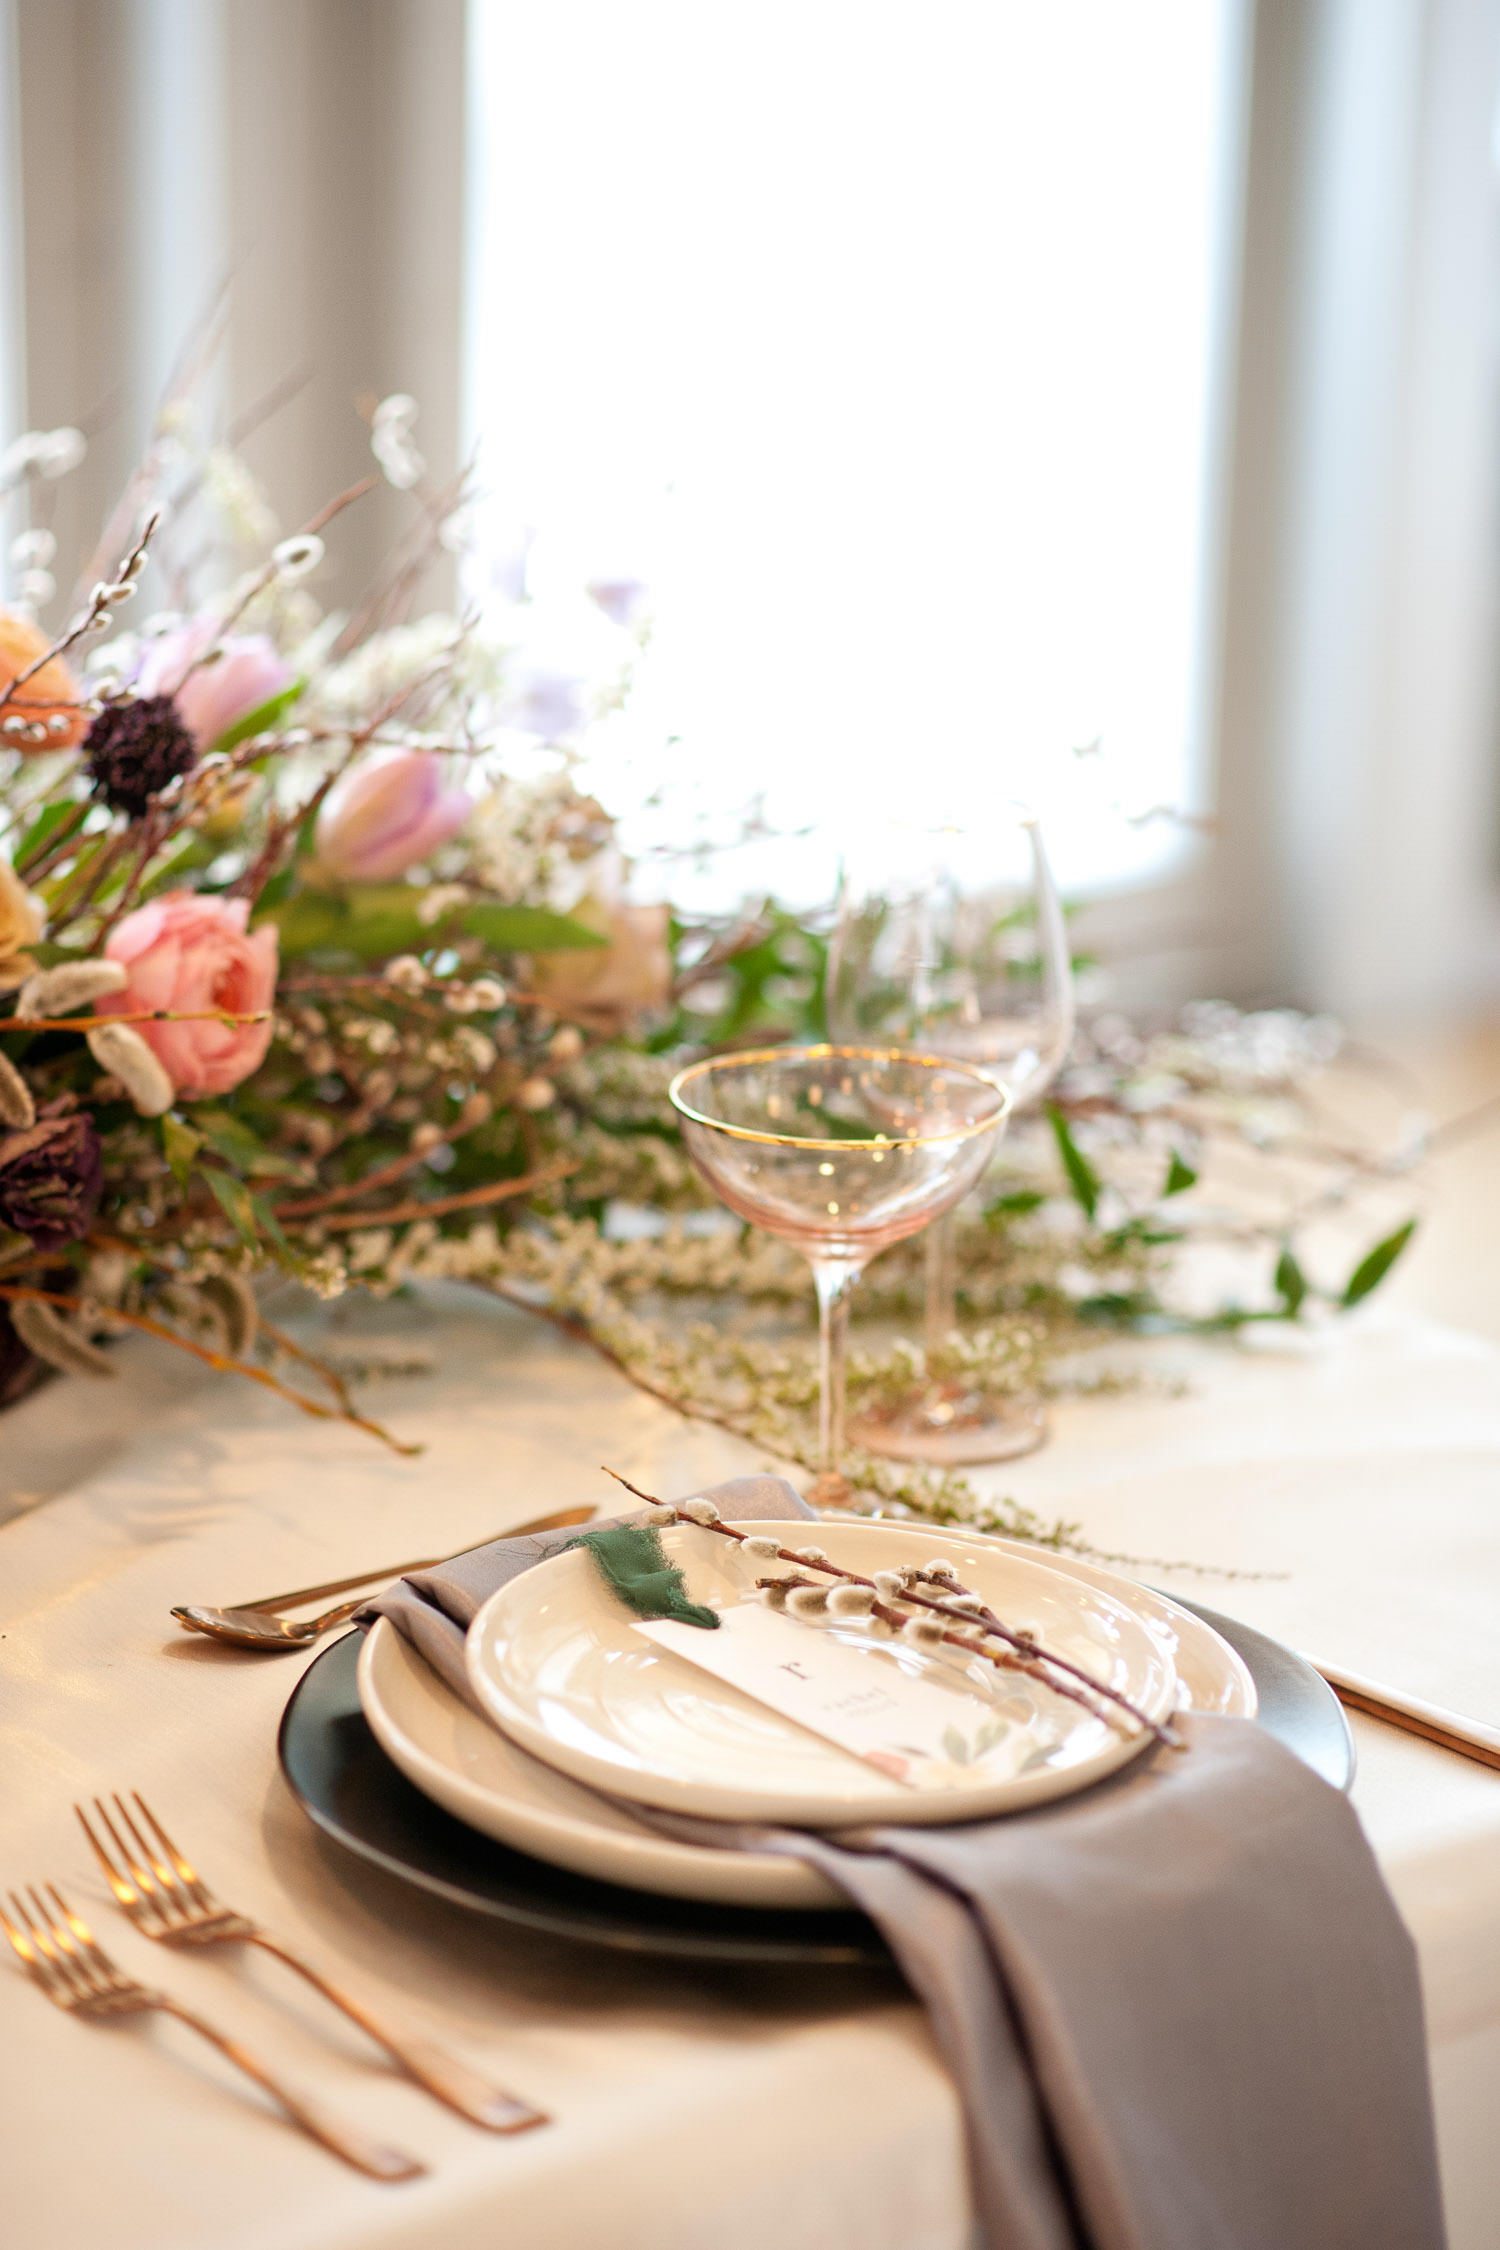 Spring wedding tabletop designed by Beyond the Proposal captured by Tara Whittaker Photography